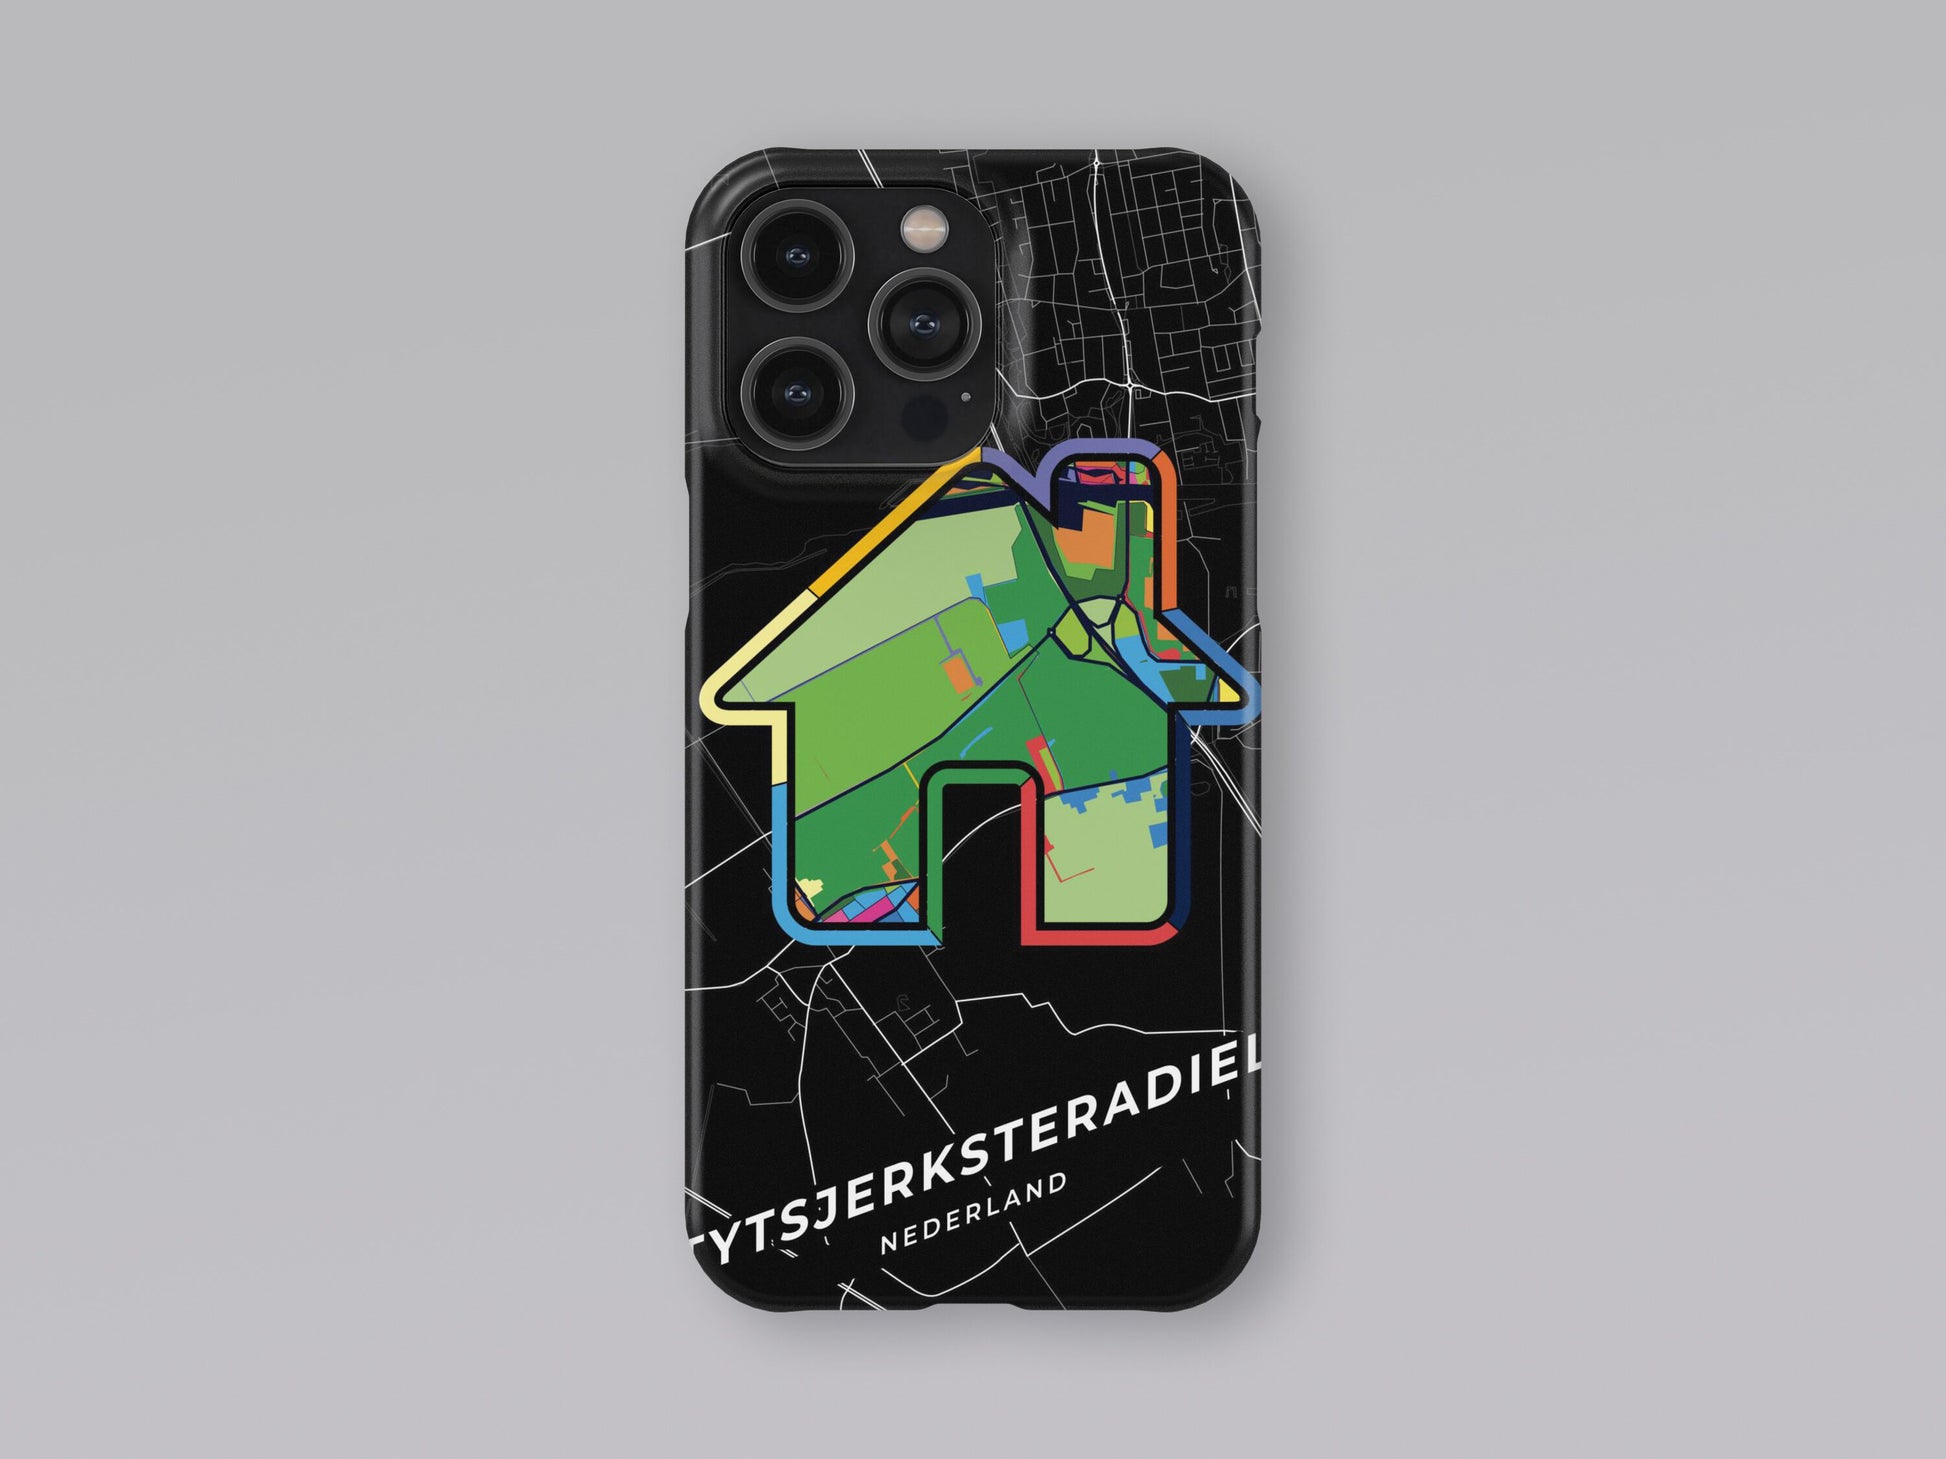 Tytsjerksteradiel Netherlands slim phone case with colorful icon 3